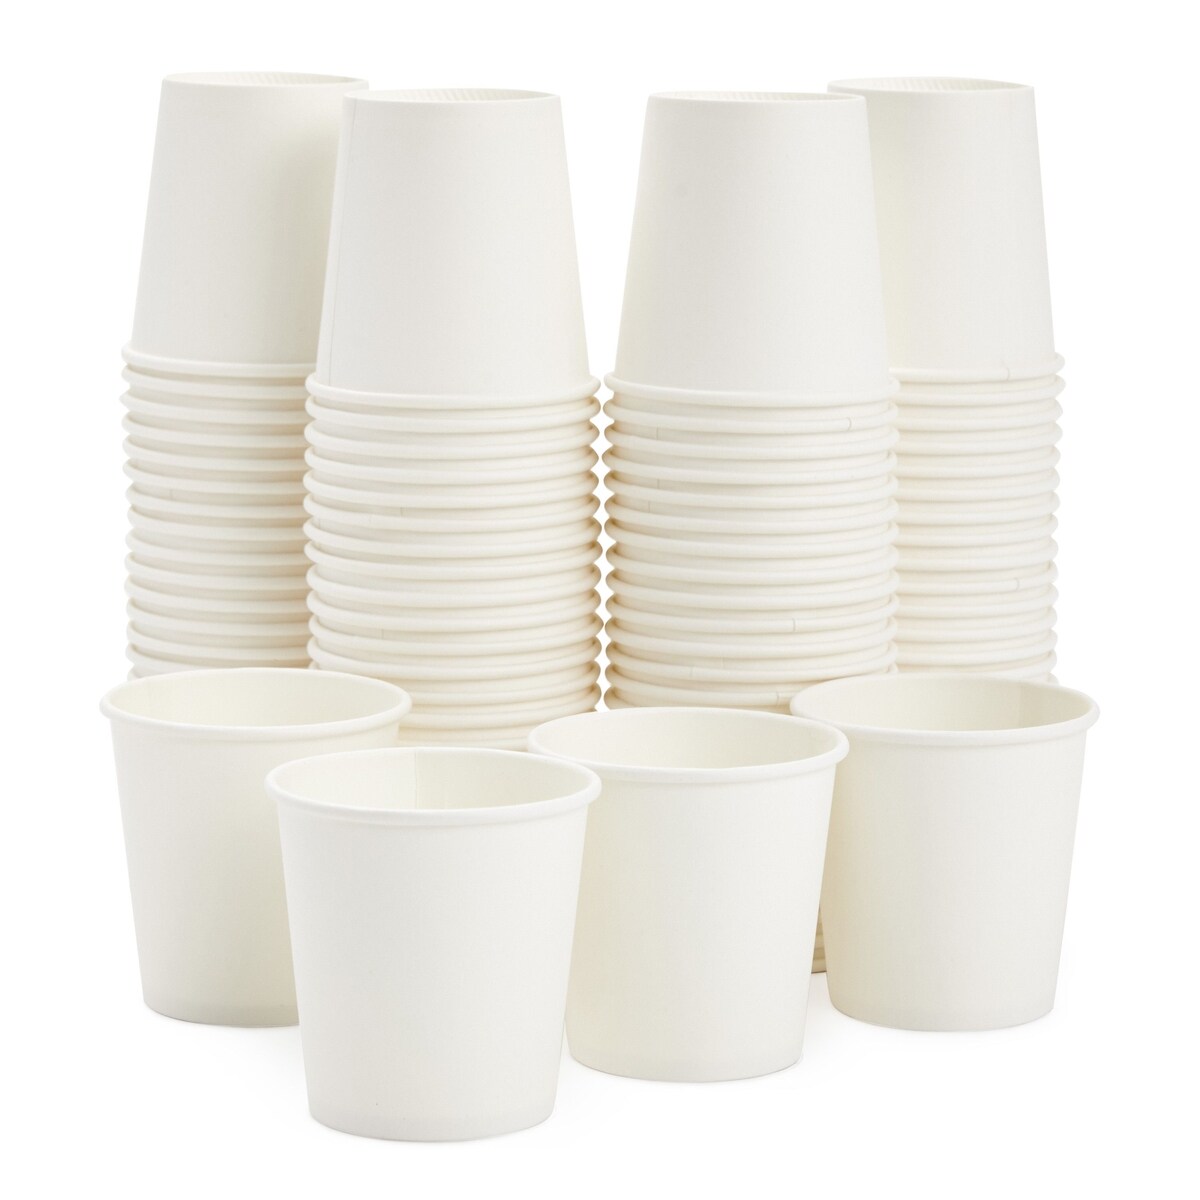 100 Pack 8oz Disposable Paper Cups, Espresso Cups, Eco Friendly Disposble Small Mouthwash Cups ,Hot/Cold Beverage Drinking Cup for Party,Travel and